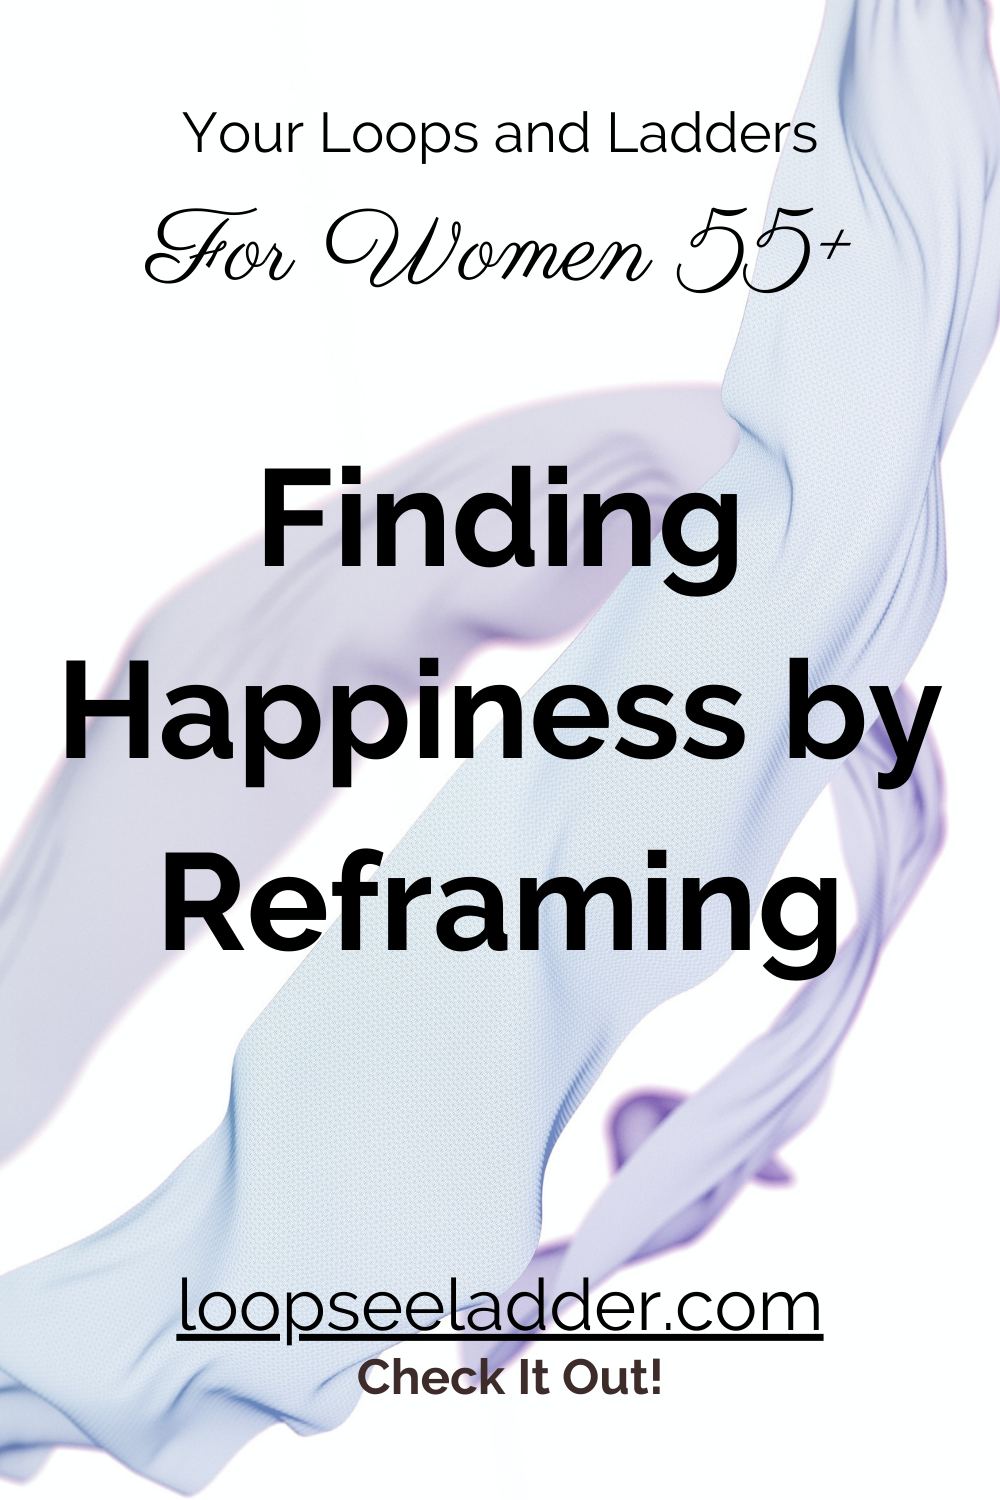 The Secret to Finding Happiness: Why Women 55+ Should Reframe Their Lives